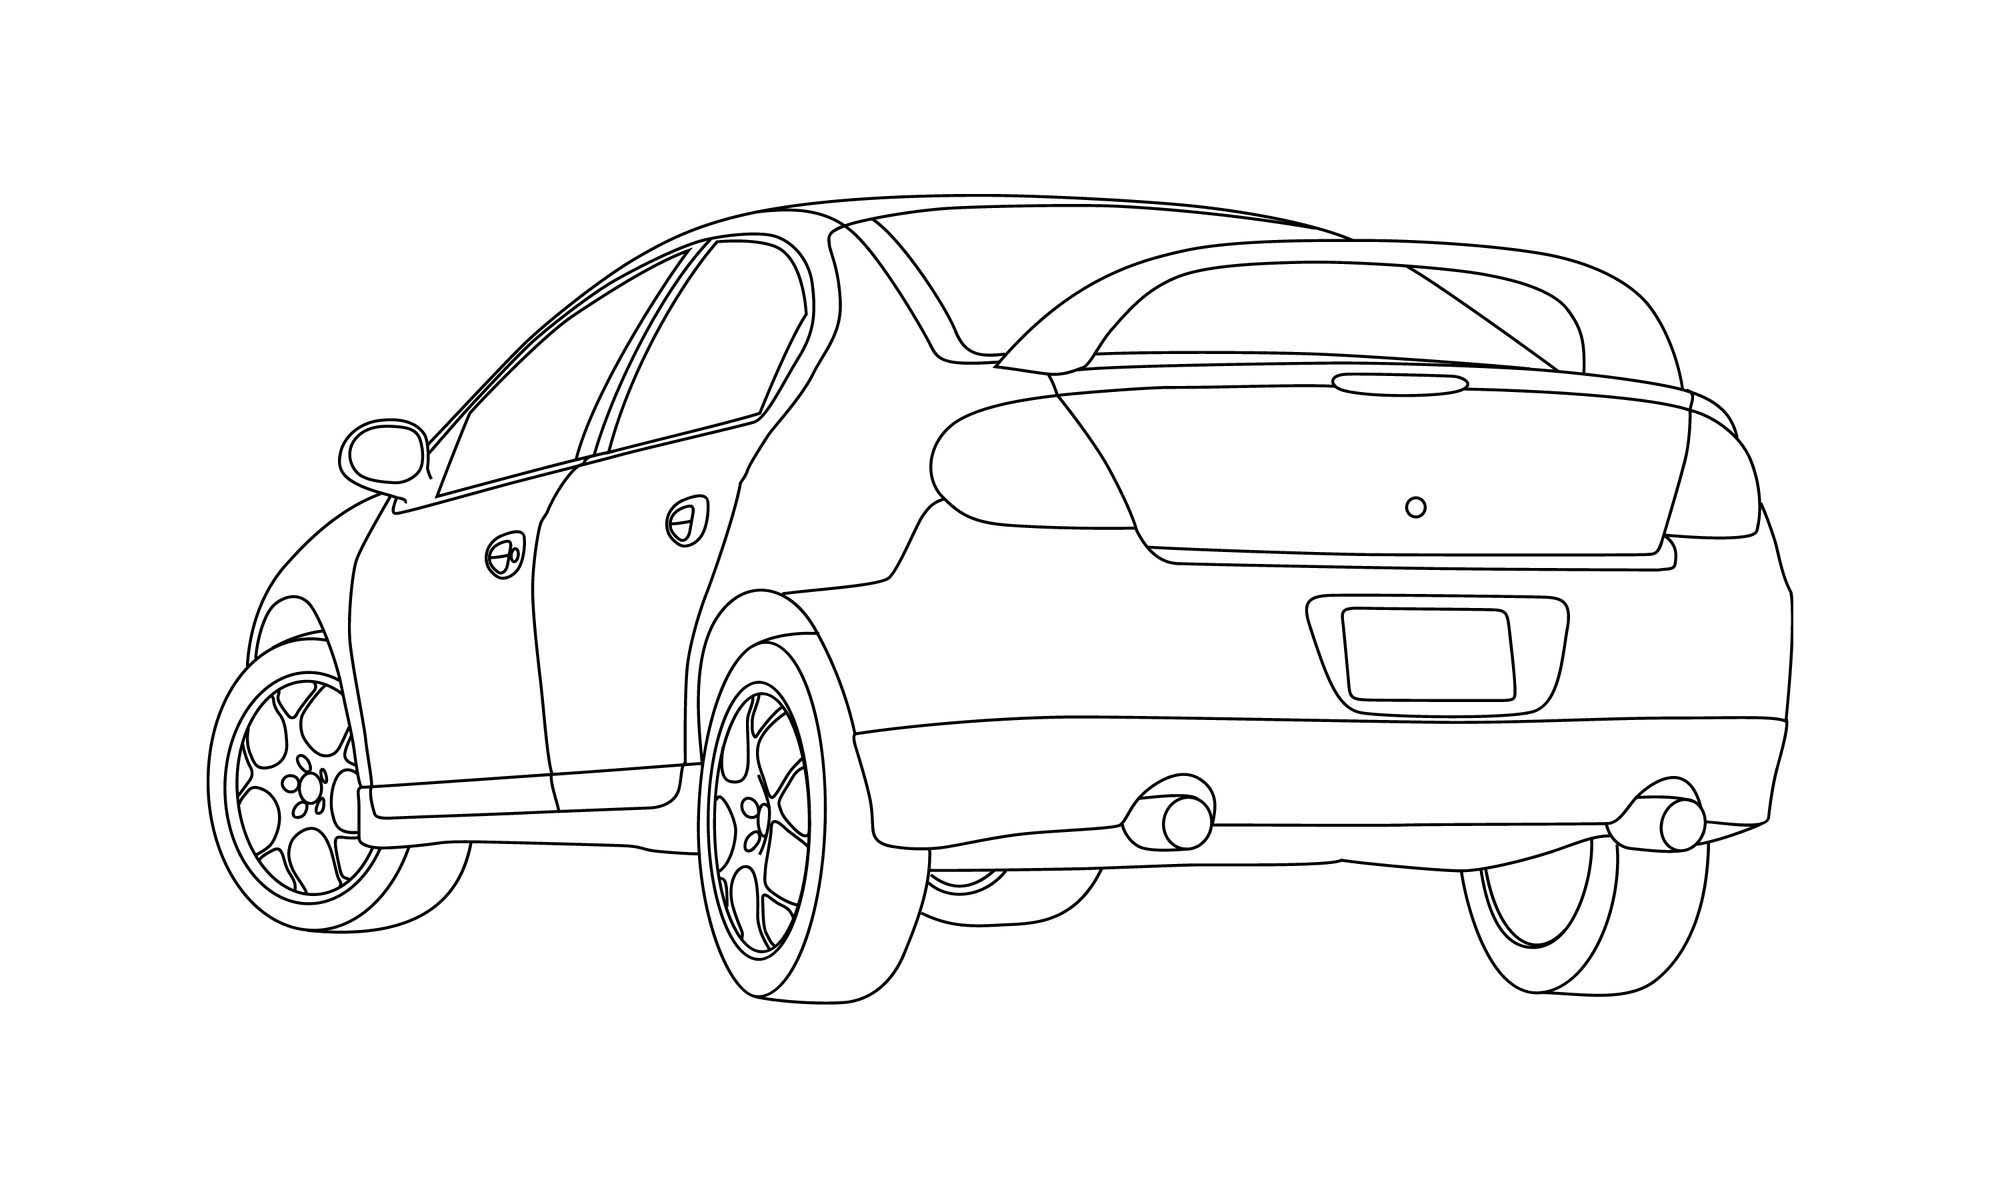 14 Pics of Dodge Neon Coloring Pages - Dodge Neon SRT-4 Drawings ...